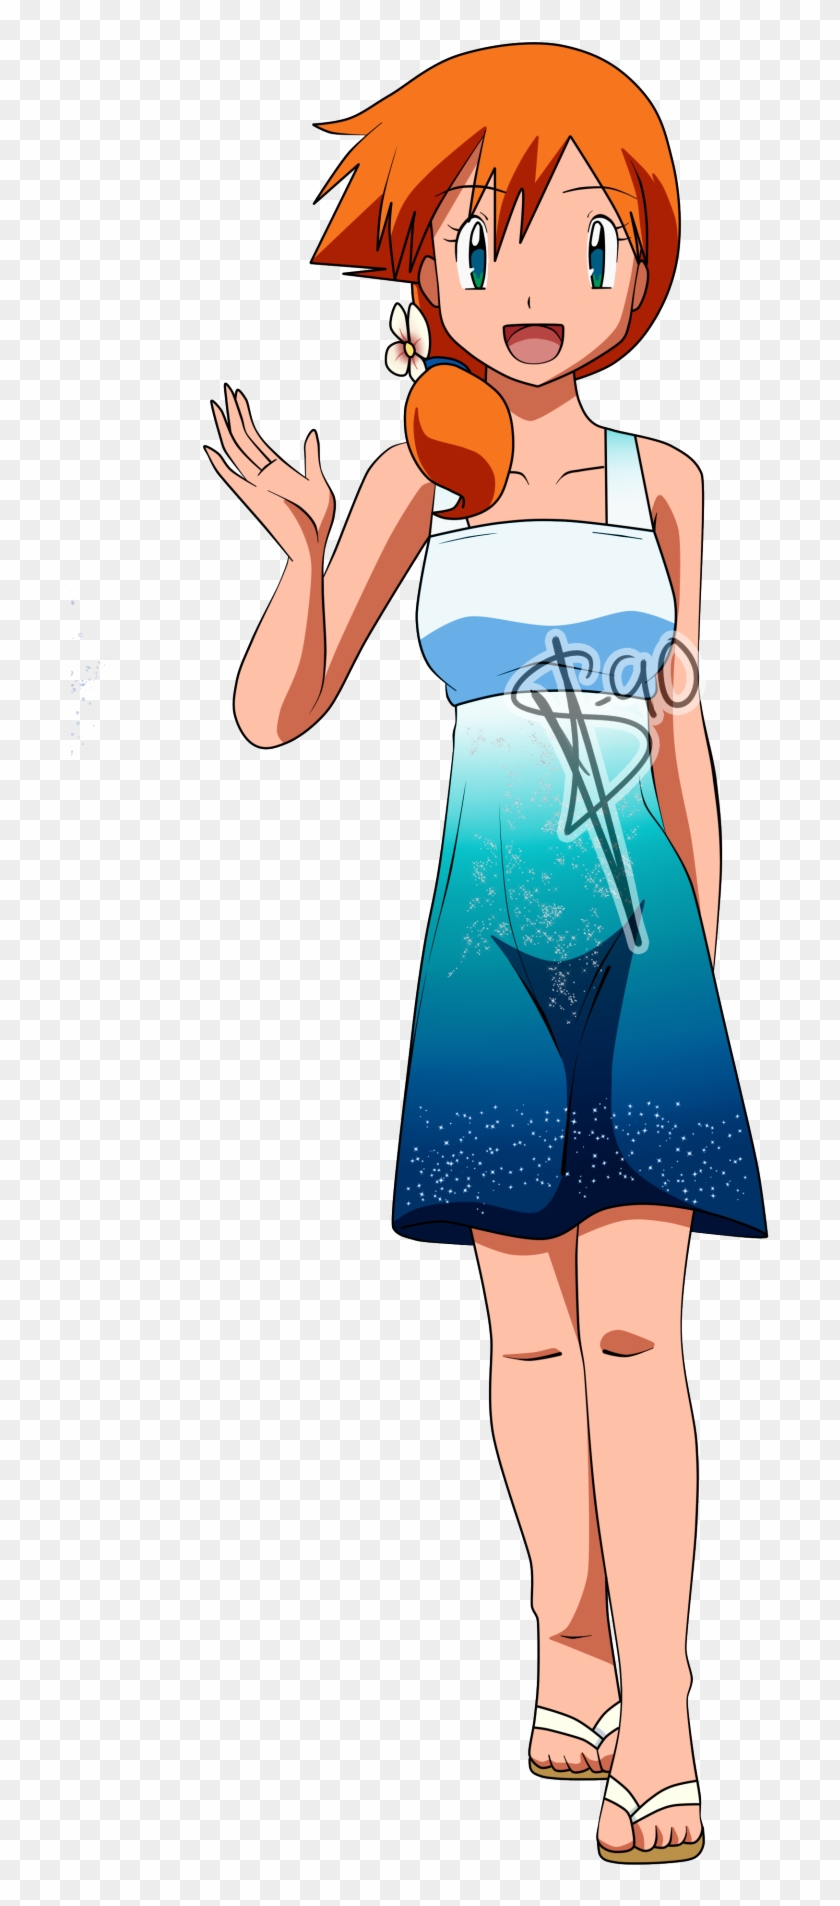 Misty In Tumblr O754ebfwsw1r3s3m2o2 1280 From Pokeshipping - Pokemon Misty The Dress Clipart